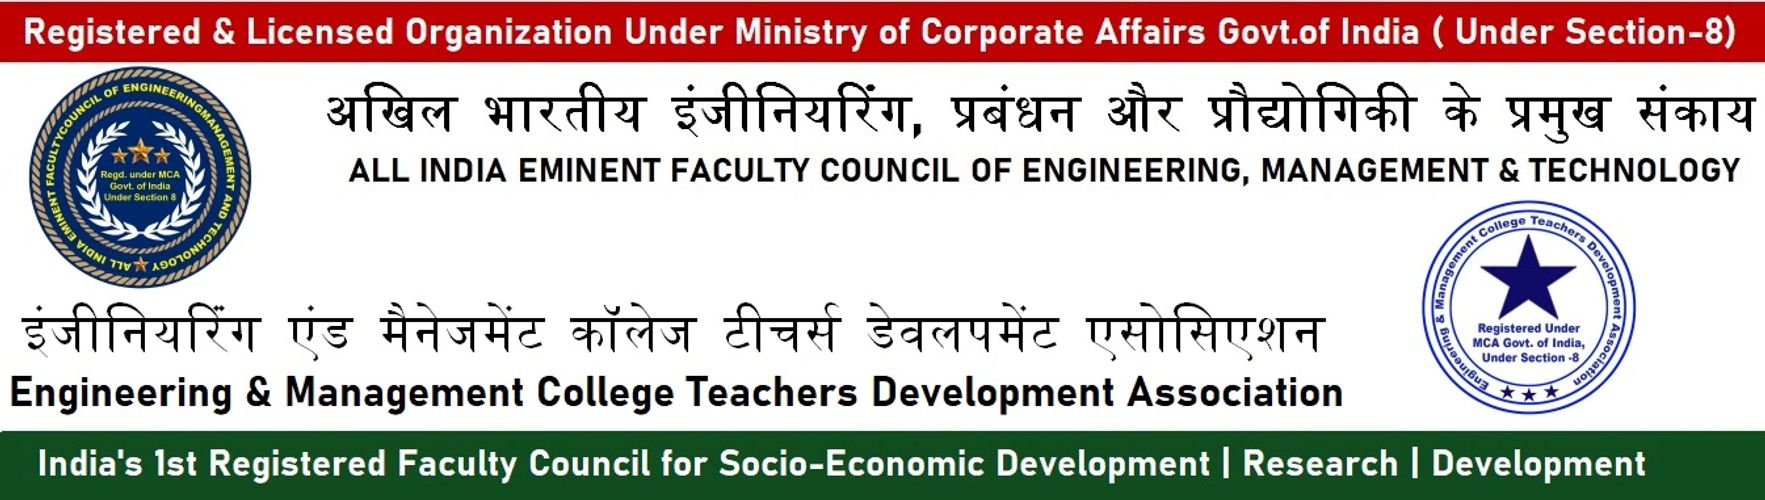 All India Eminent Faculty Council of Engineering,Management&Technology- India's1 st Faculty Council